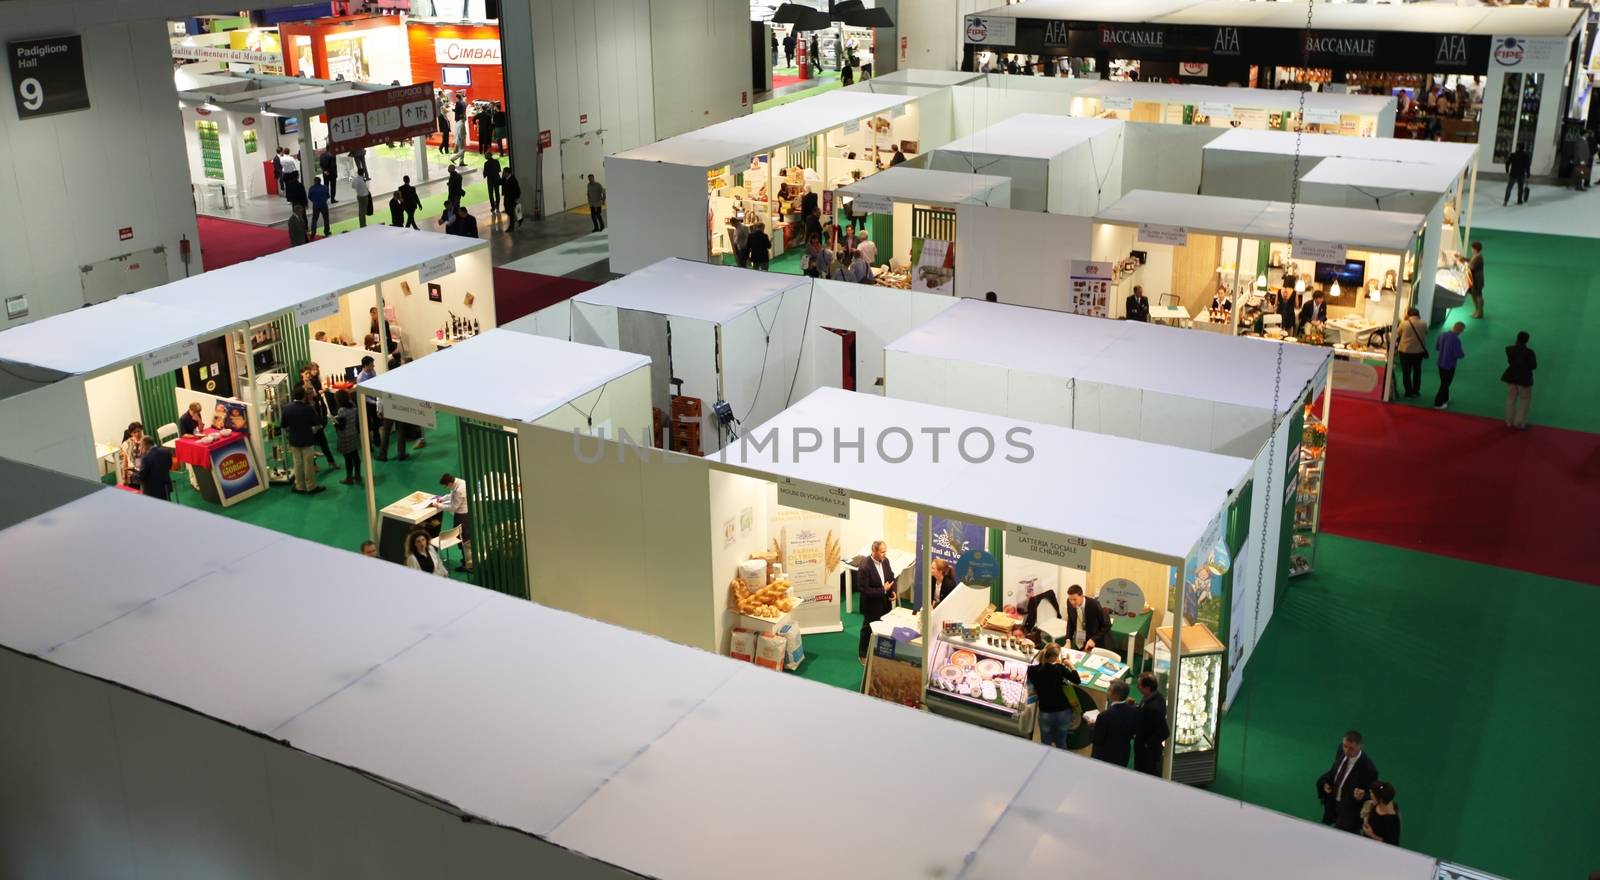 People visit Made in Italy food productions at Tuttofood 2013, World Food Exhibition during Food Week in Milano, Italy.